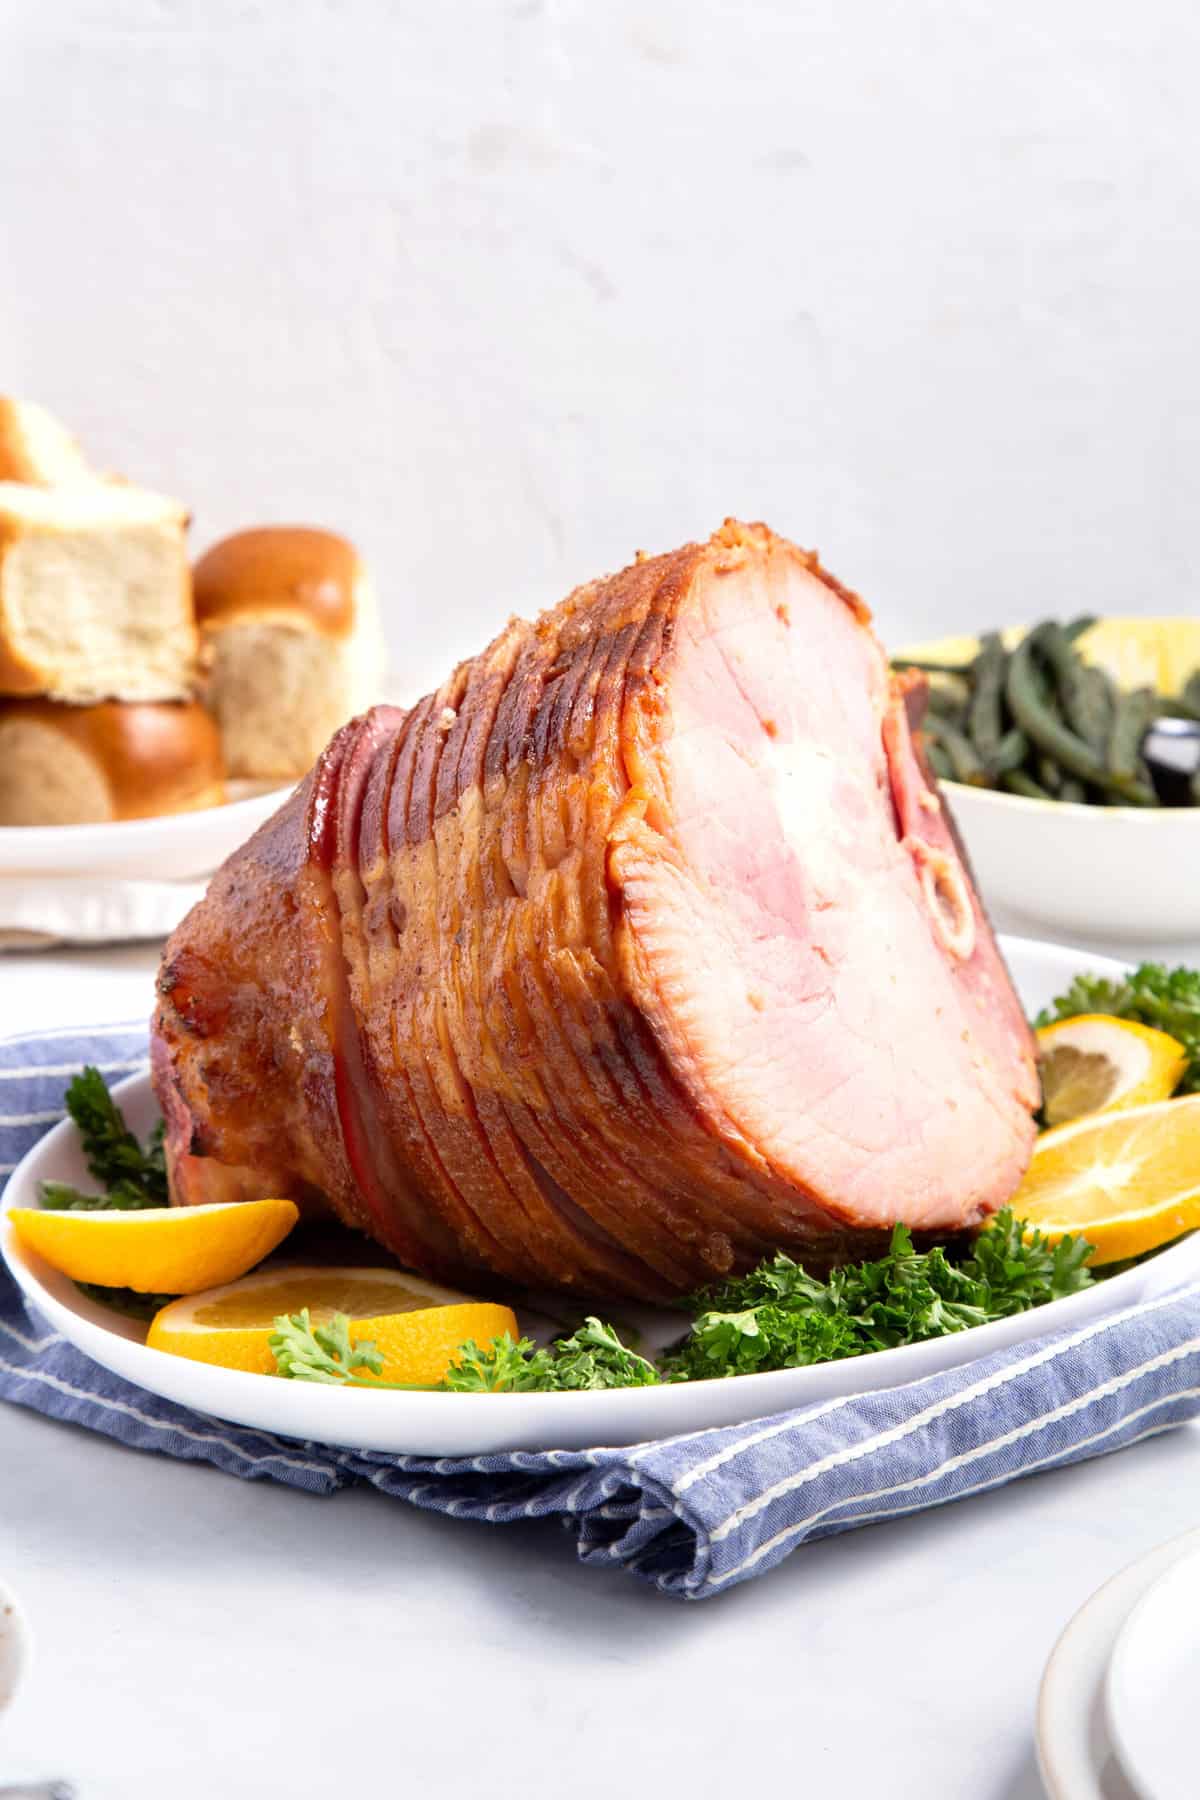 honey baked ham served on a bed of greens and fresh citrus